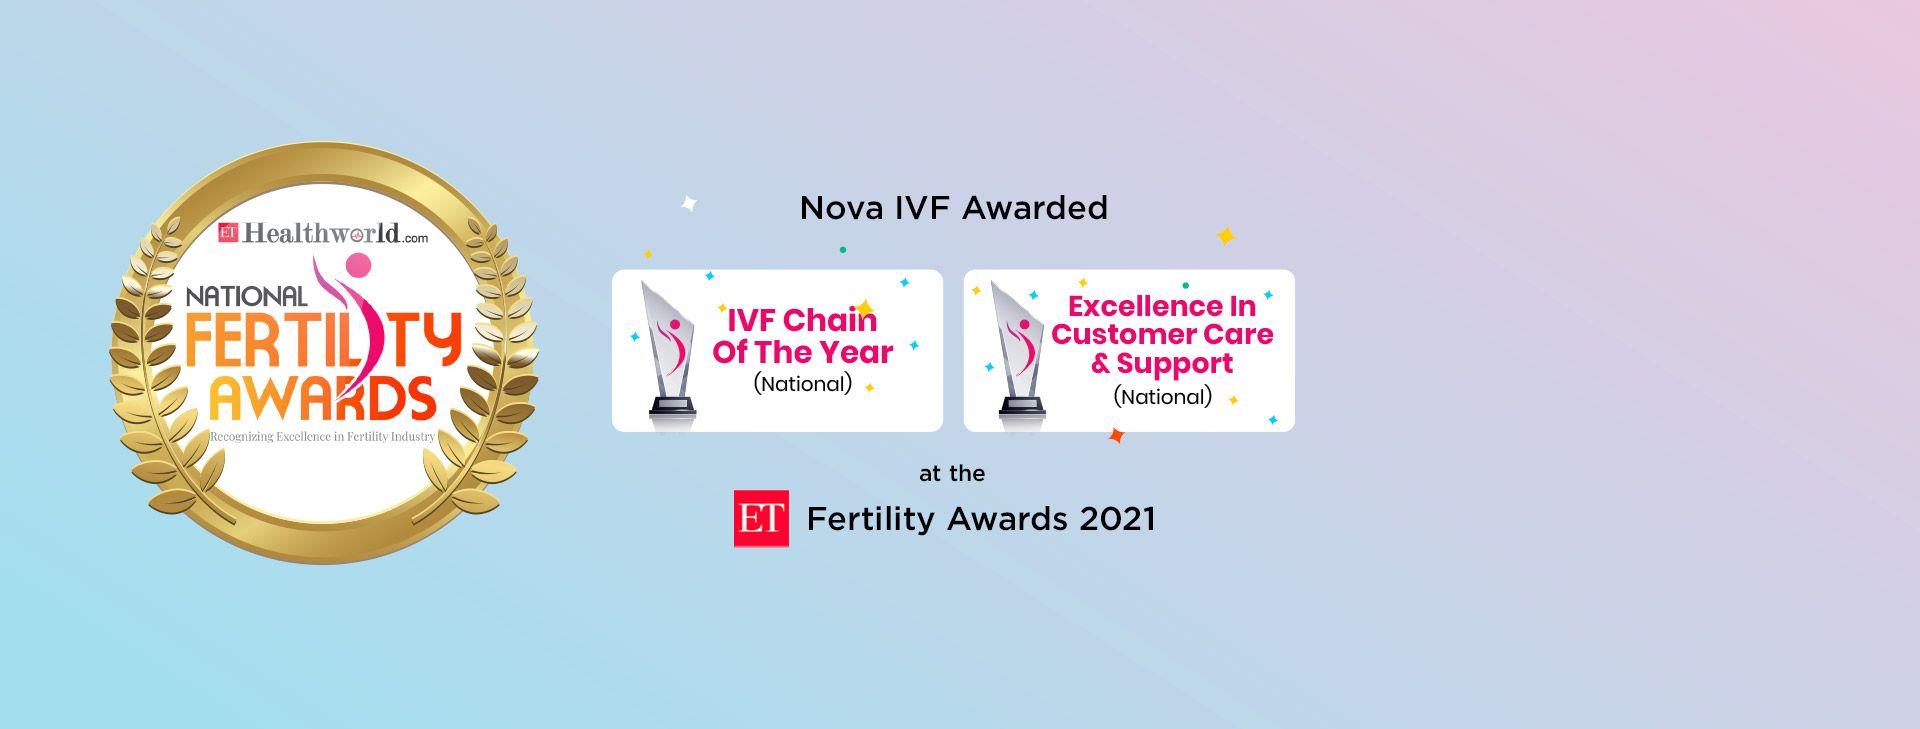 IVF Chain of the Year 2021 - ET Awards 2021